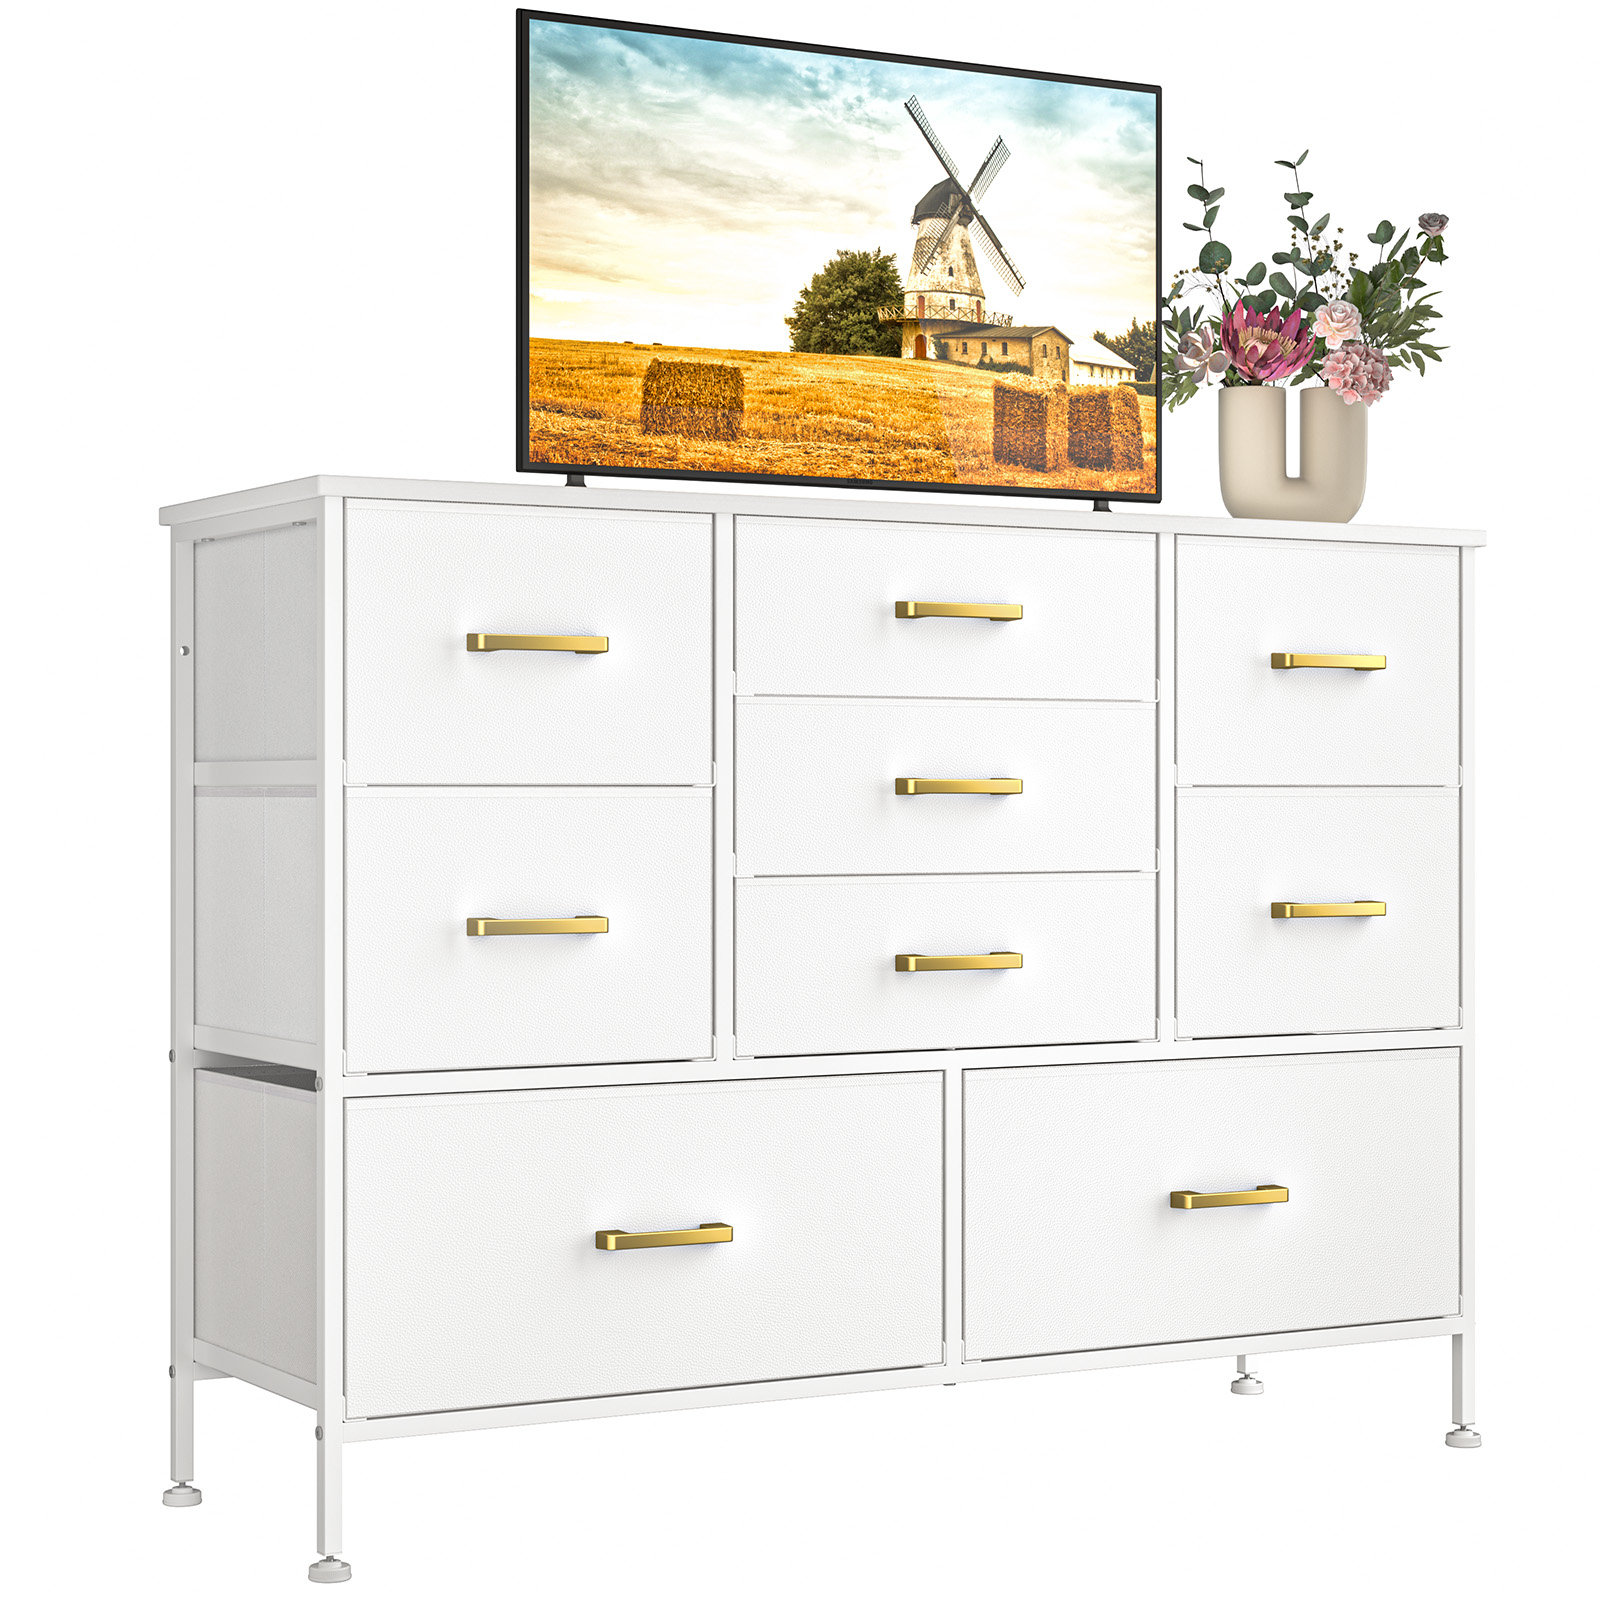 Ebern Designs Ojaswi 9 Dresser, Chest of Drawers with Wide 39